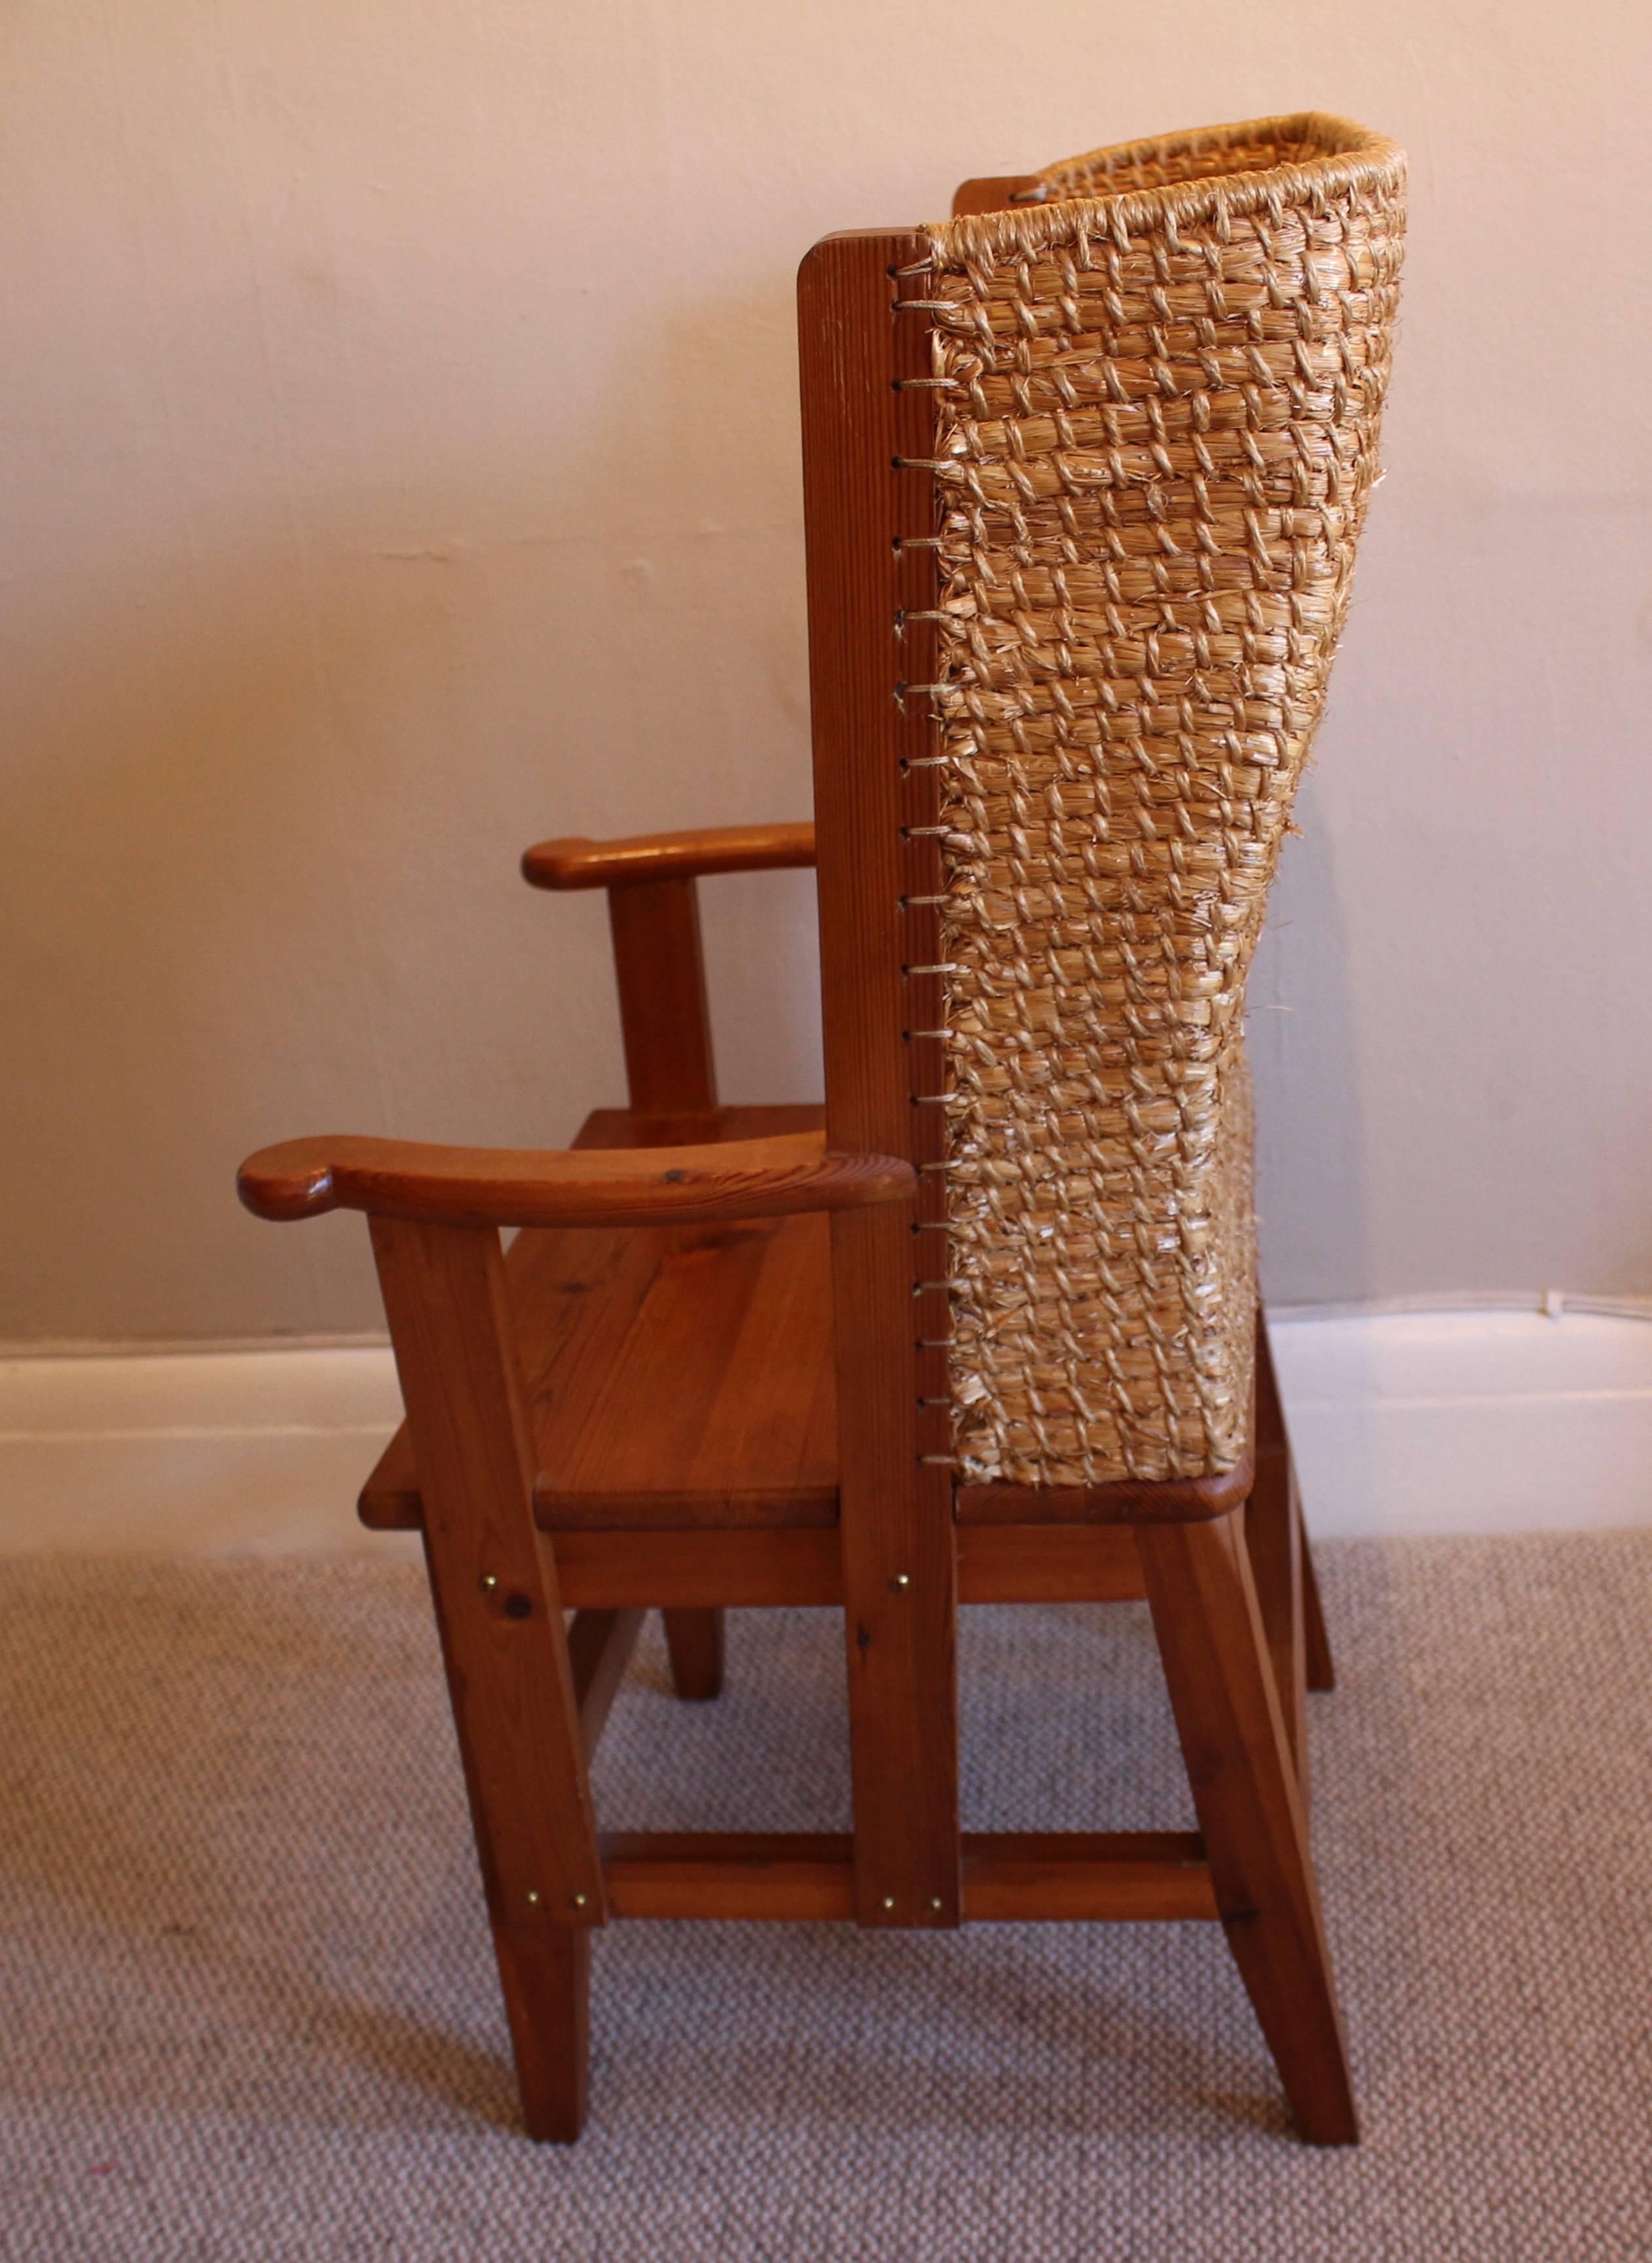 A delightful Orkney Chair. In good condition and although of smaller proportions it's large enough for an average to smaller size adult. Orkney chair from Scotland made of pine and straw to protect the one from the harsh North Sea winds